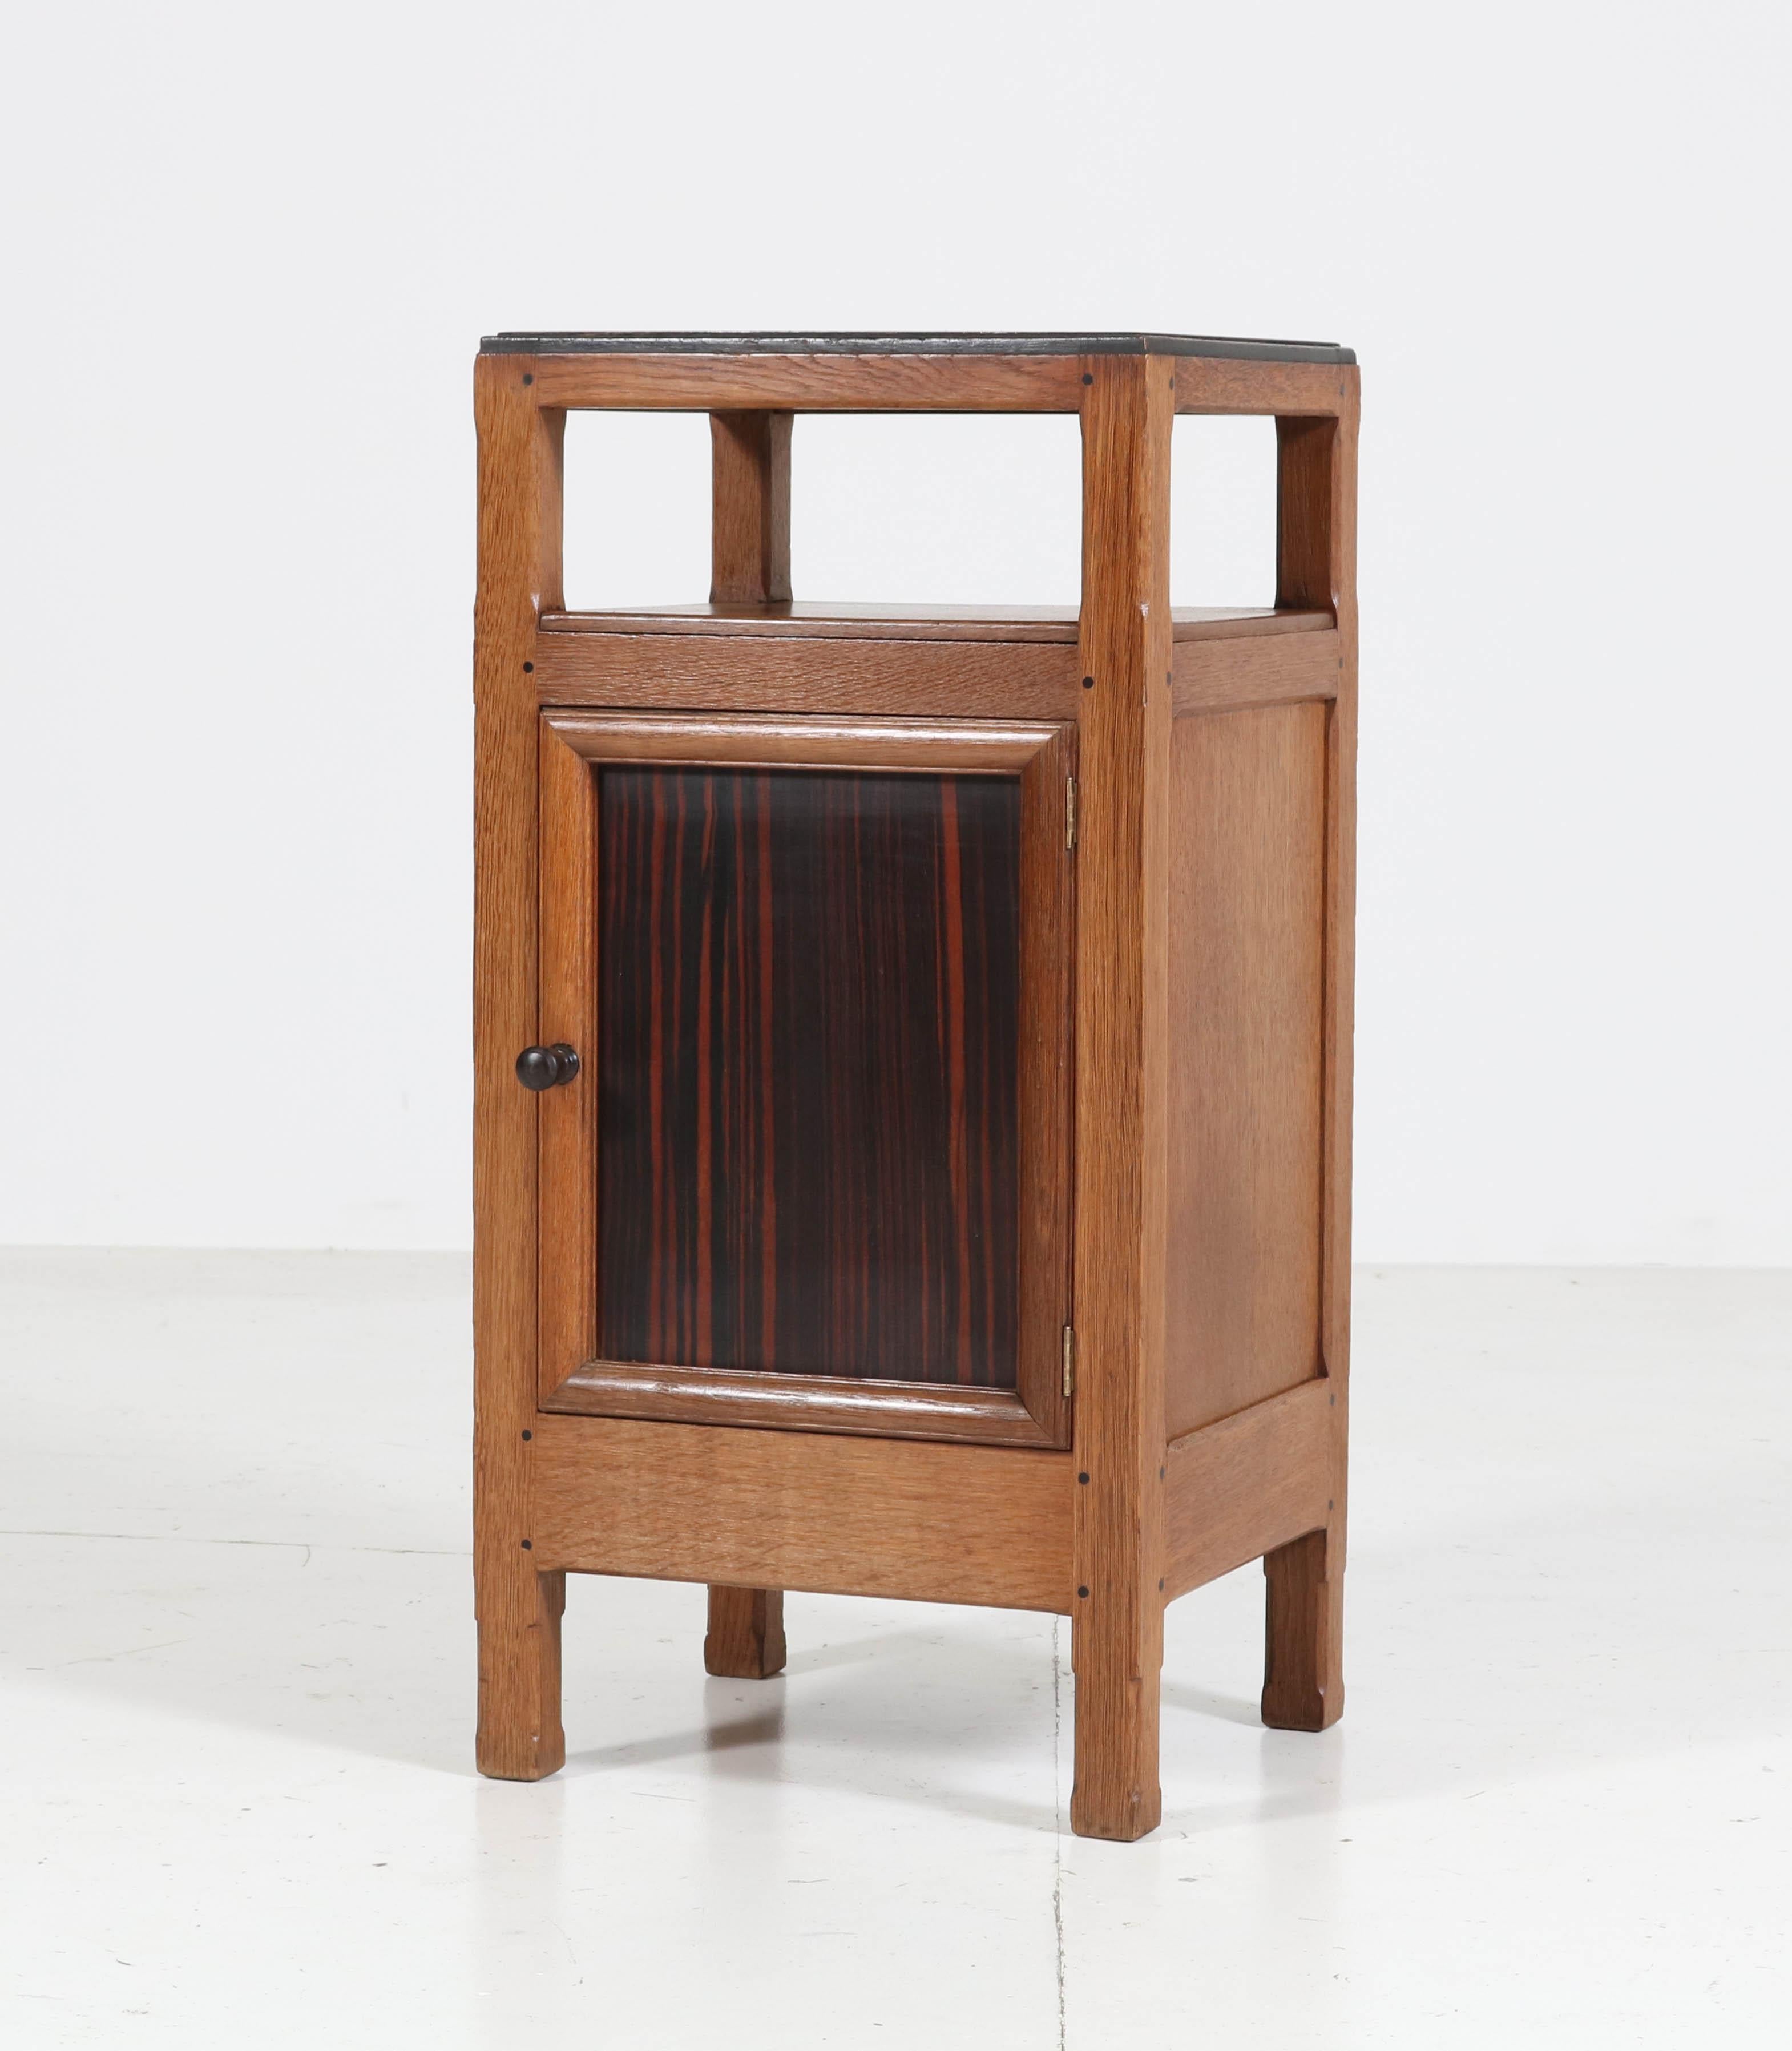 Wonderful and rare Art Deco Haagse School nightstand or bedside table.
Design by Paul Bromberg for H. Pander & Zonen Den Haag.
Striking Dutch design from the twenties.
Solid oak with ebony Macassar top and front.
Marked with original